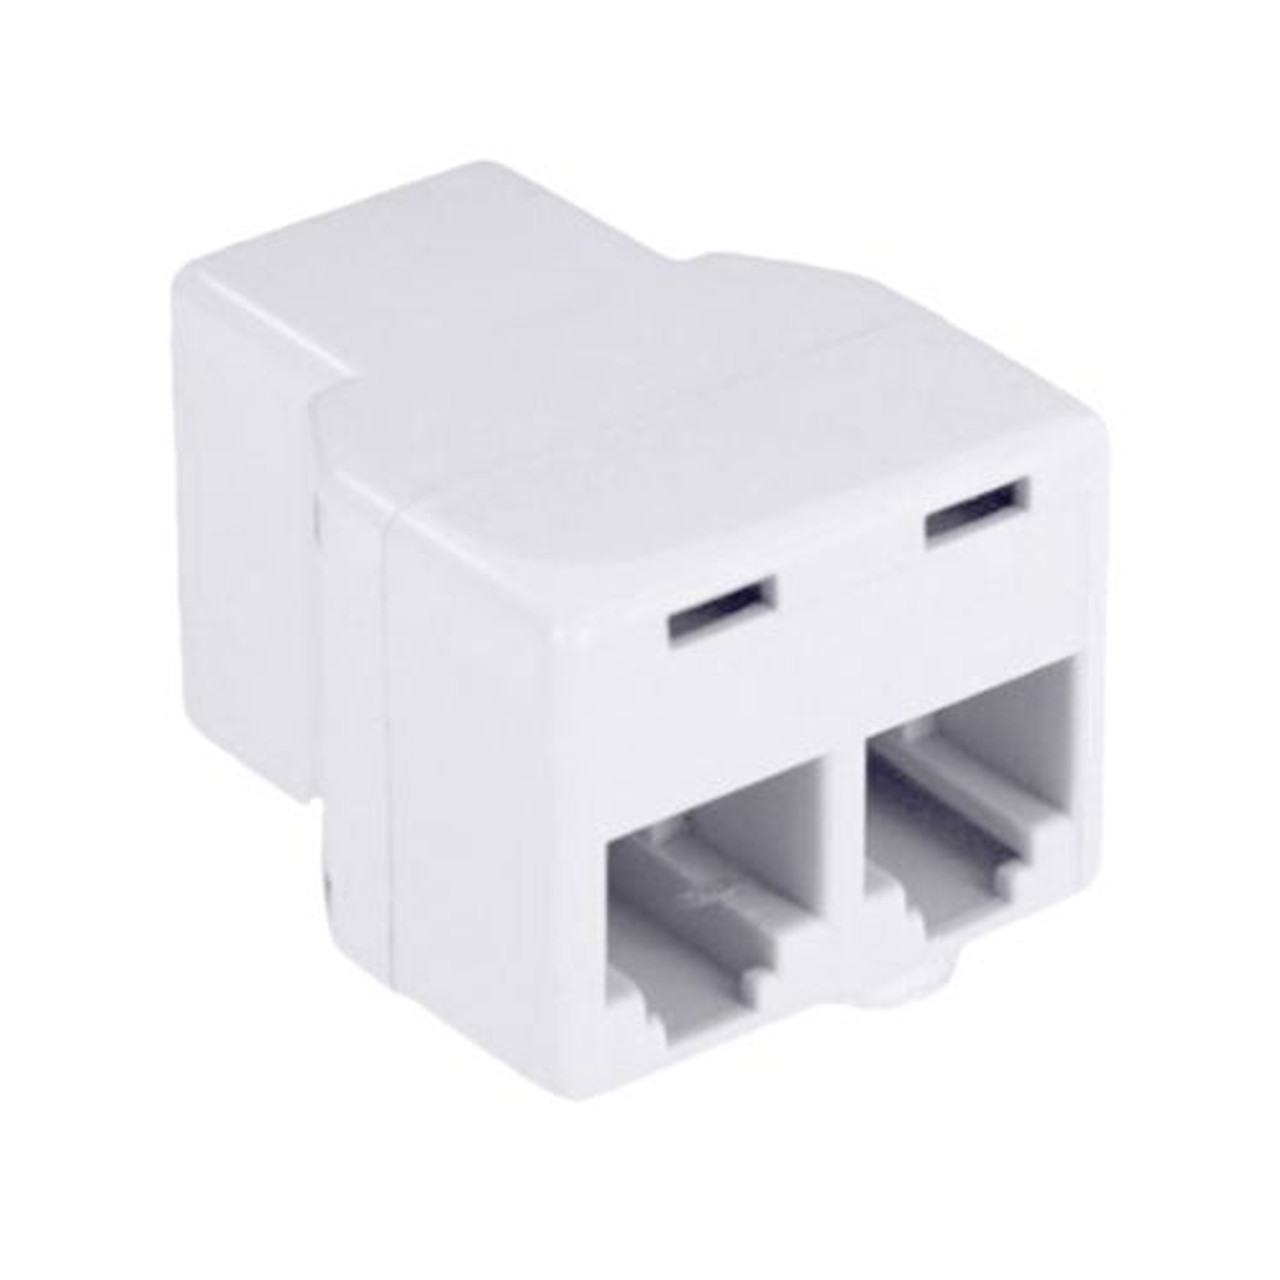 Leviton C0280-W Phone Modular 2-Way Coupler Tee Adapter Splitter White Dual Cord Telephone Line Data Base Plug Extension Divider Connection Jack Adapter, Part # C0280W